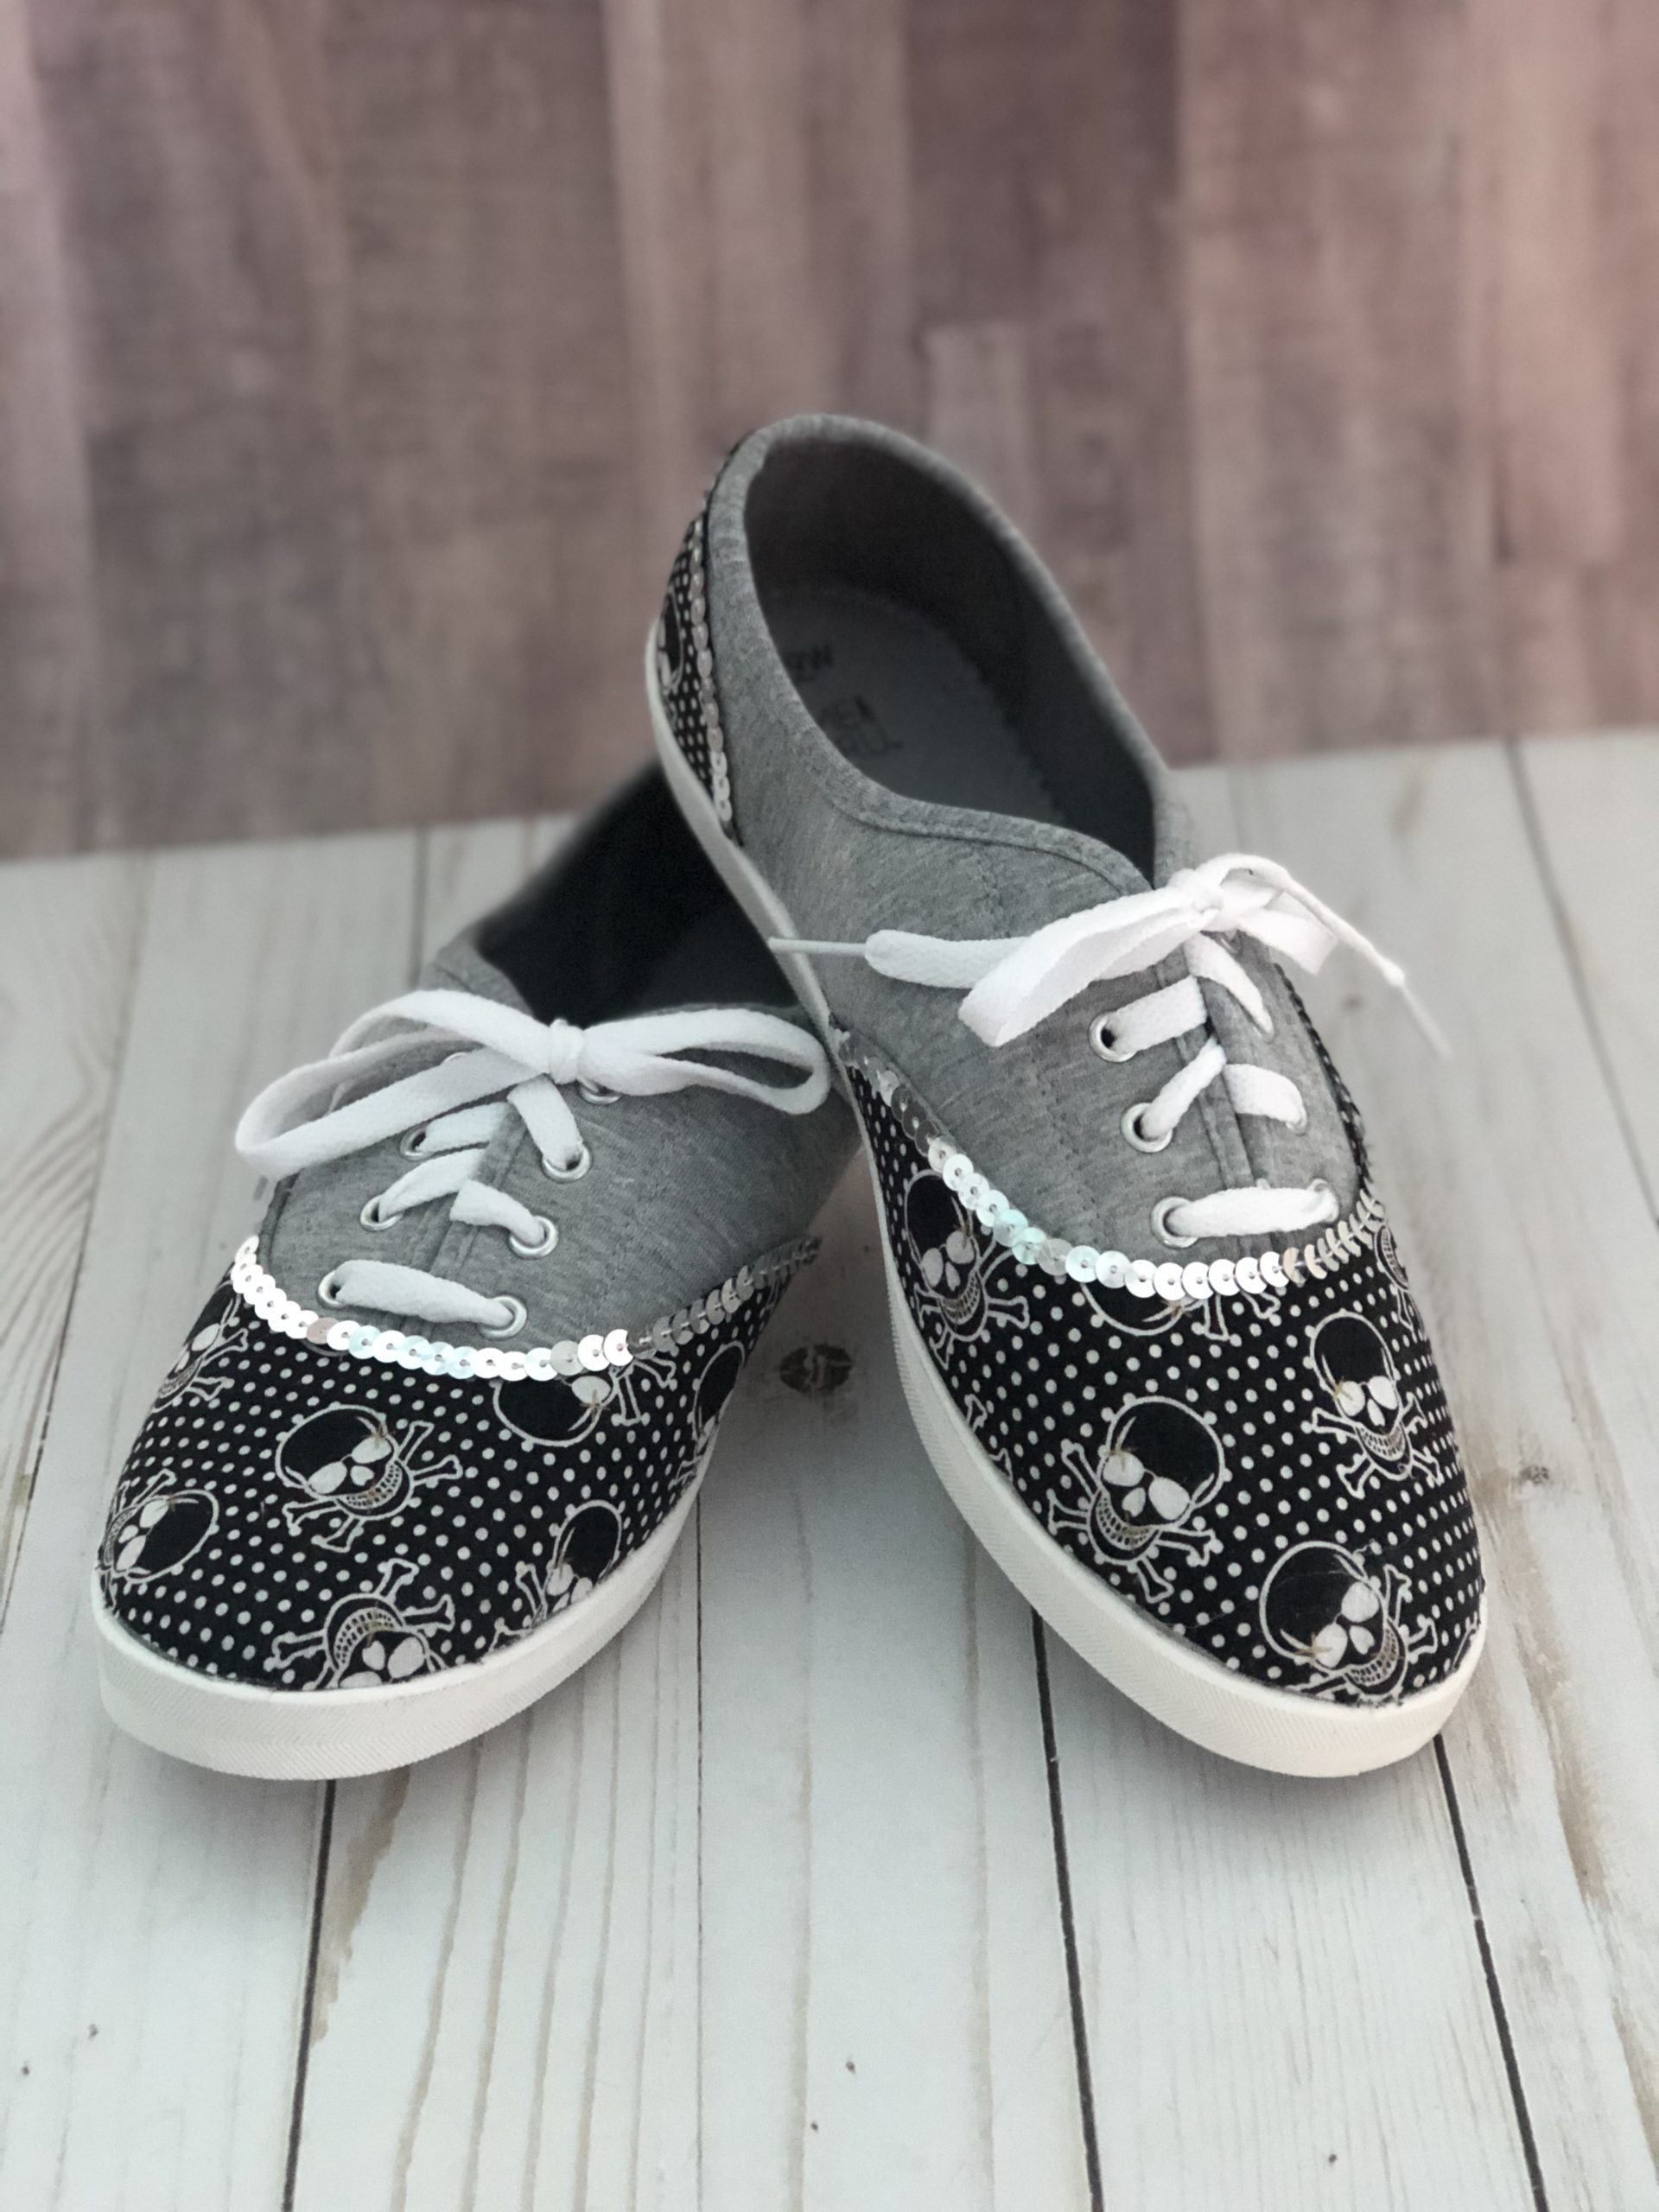 DIY How To Add Fabric to Sneakers with Mod Podge - CATHIE FILIAN's Handmade  Happy Hour